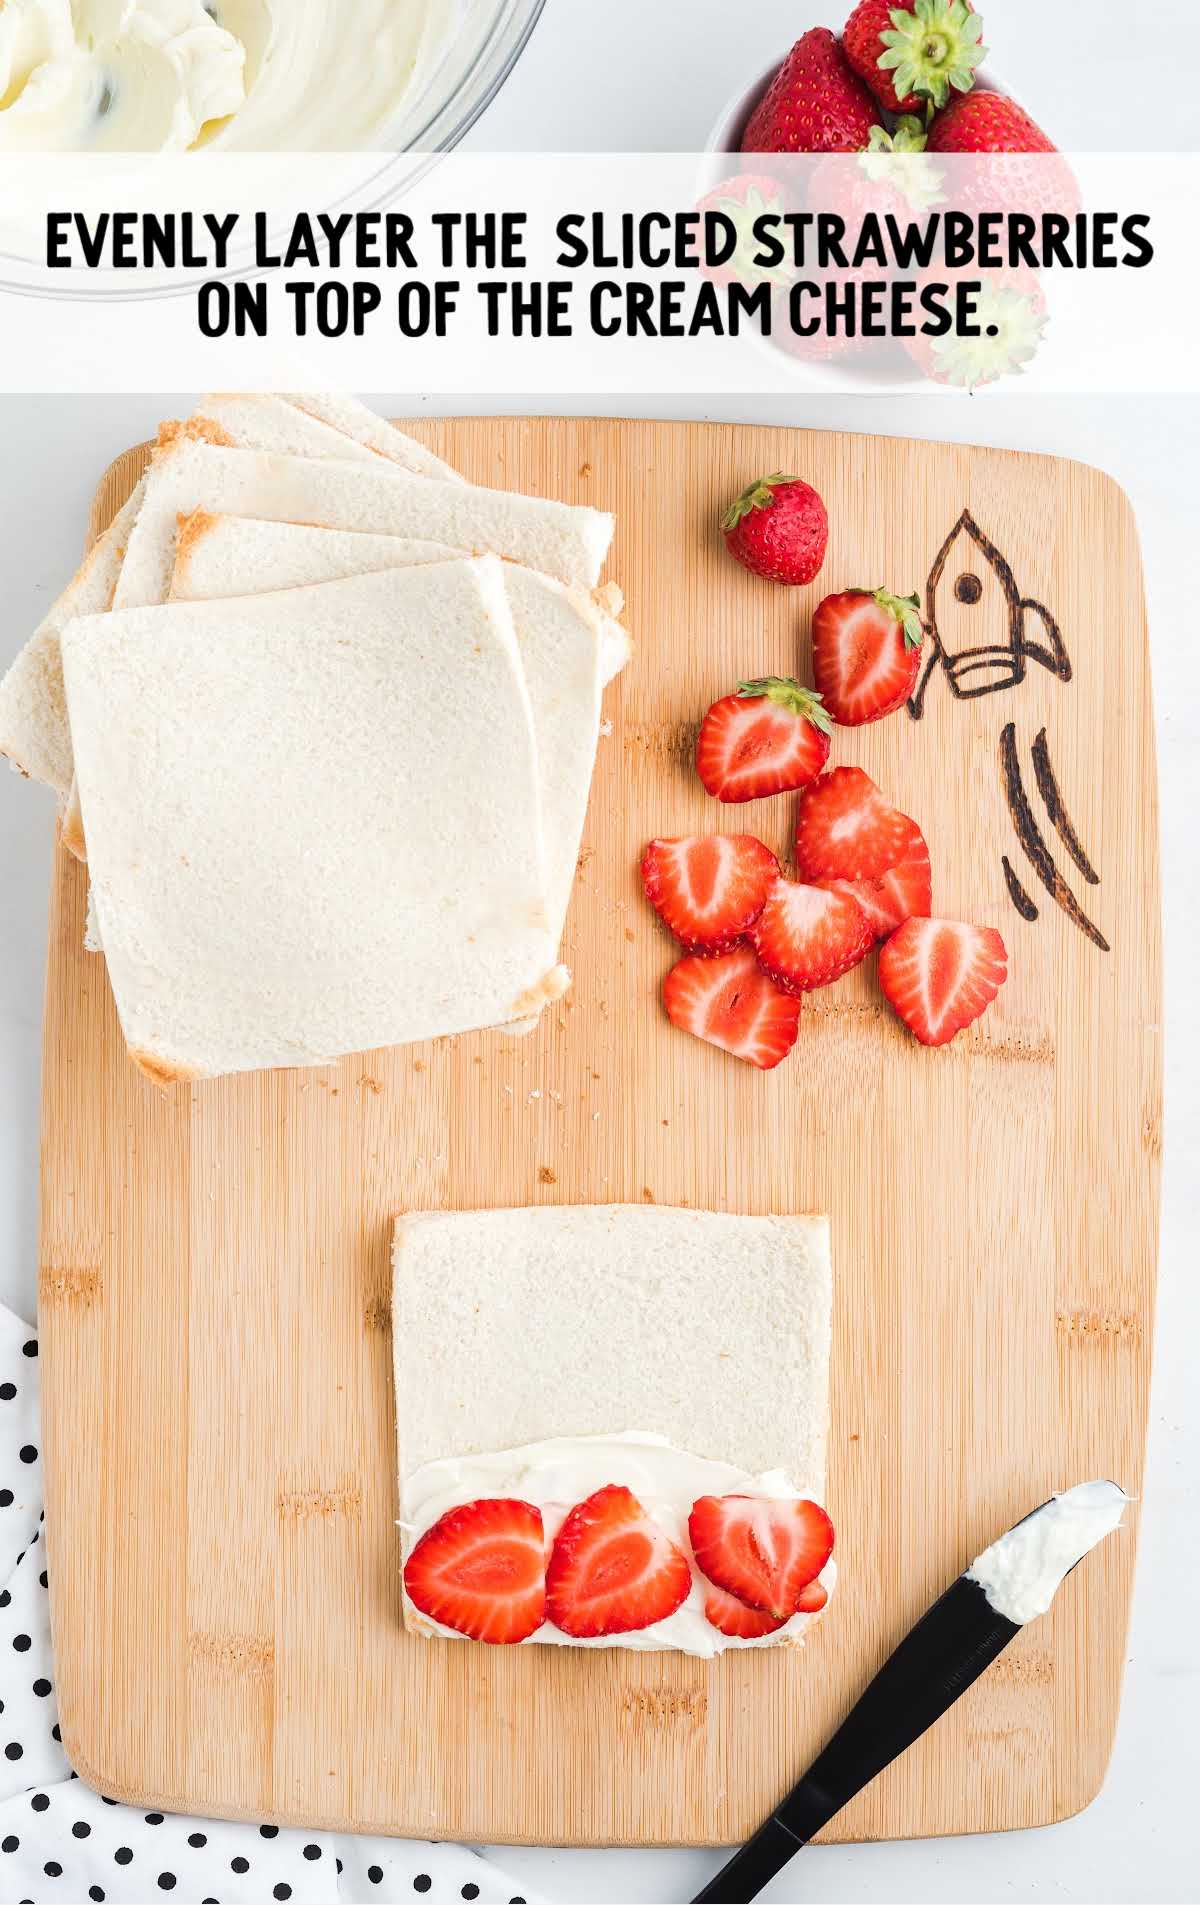 slices of strawberries being layered on top of the cream cheese mixture on the bread